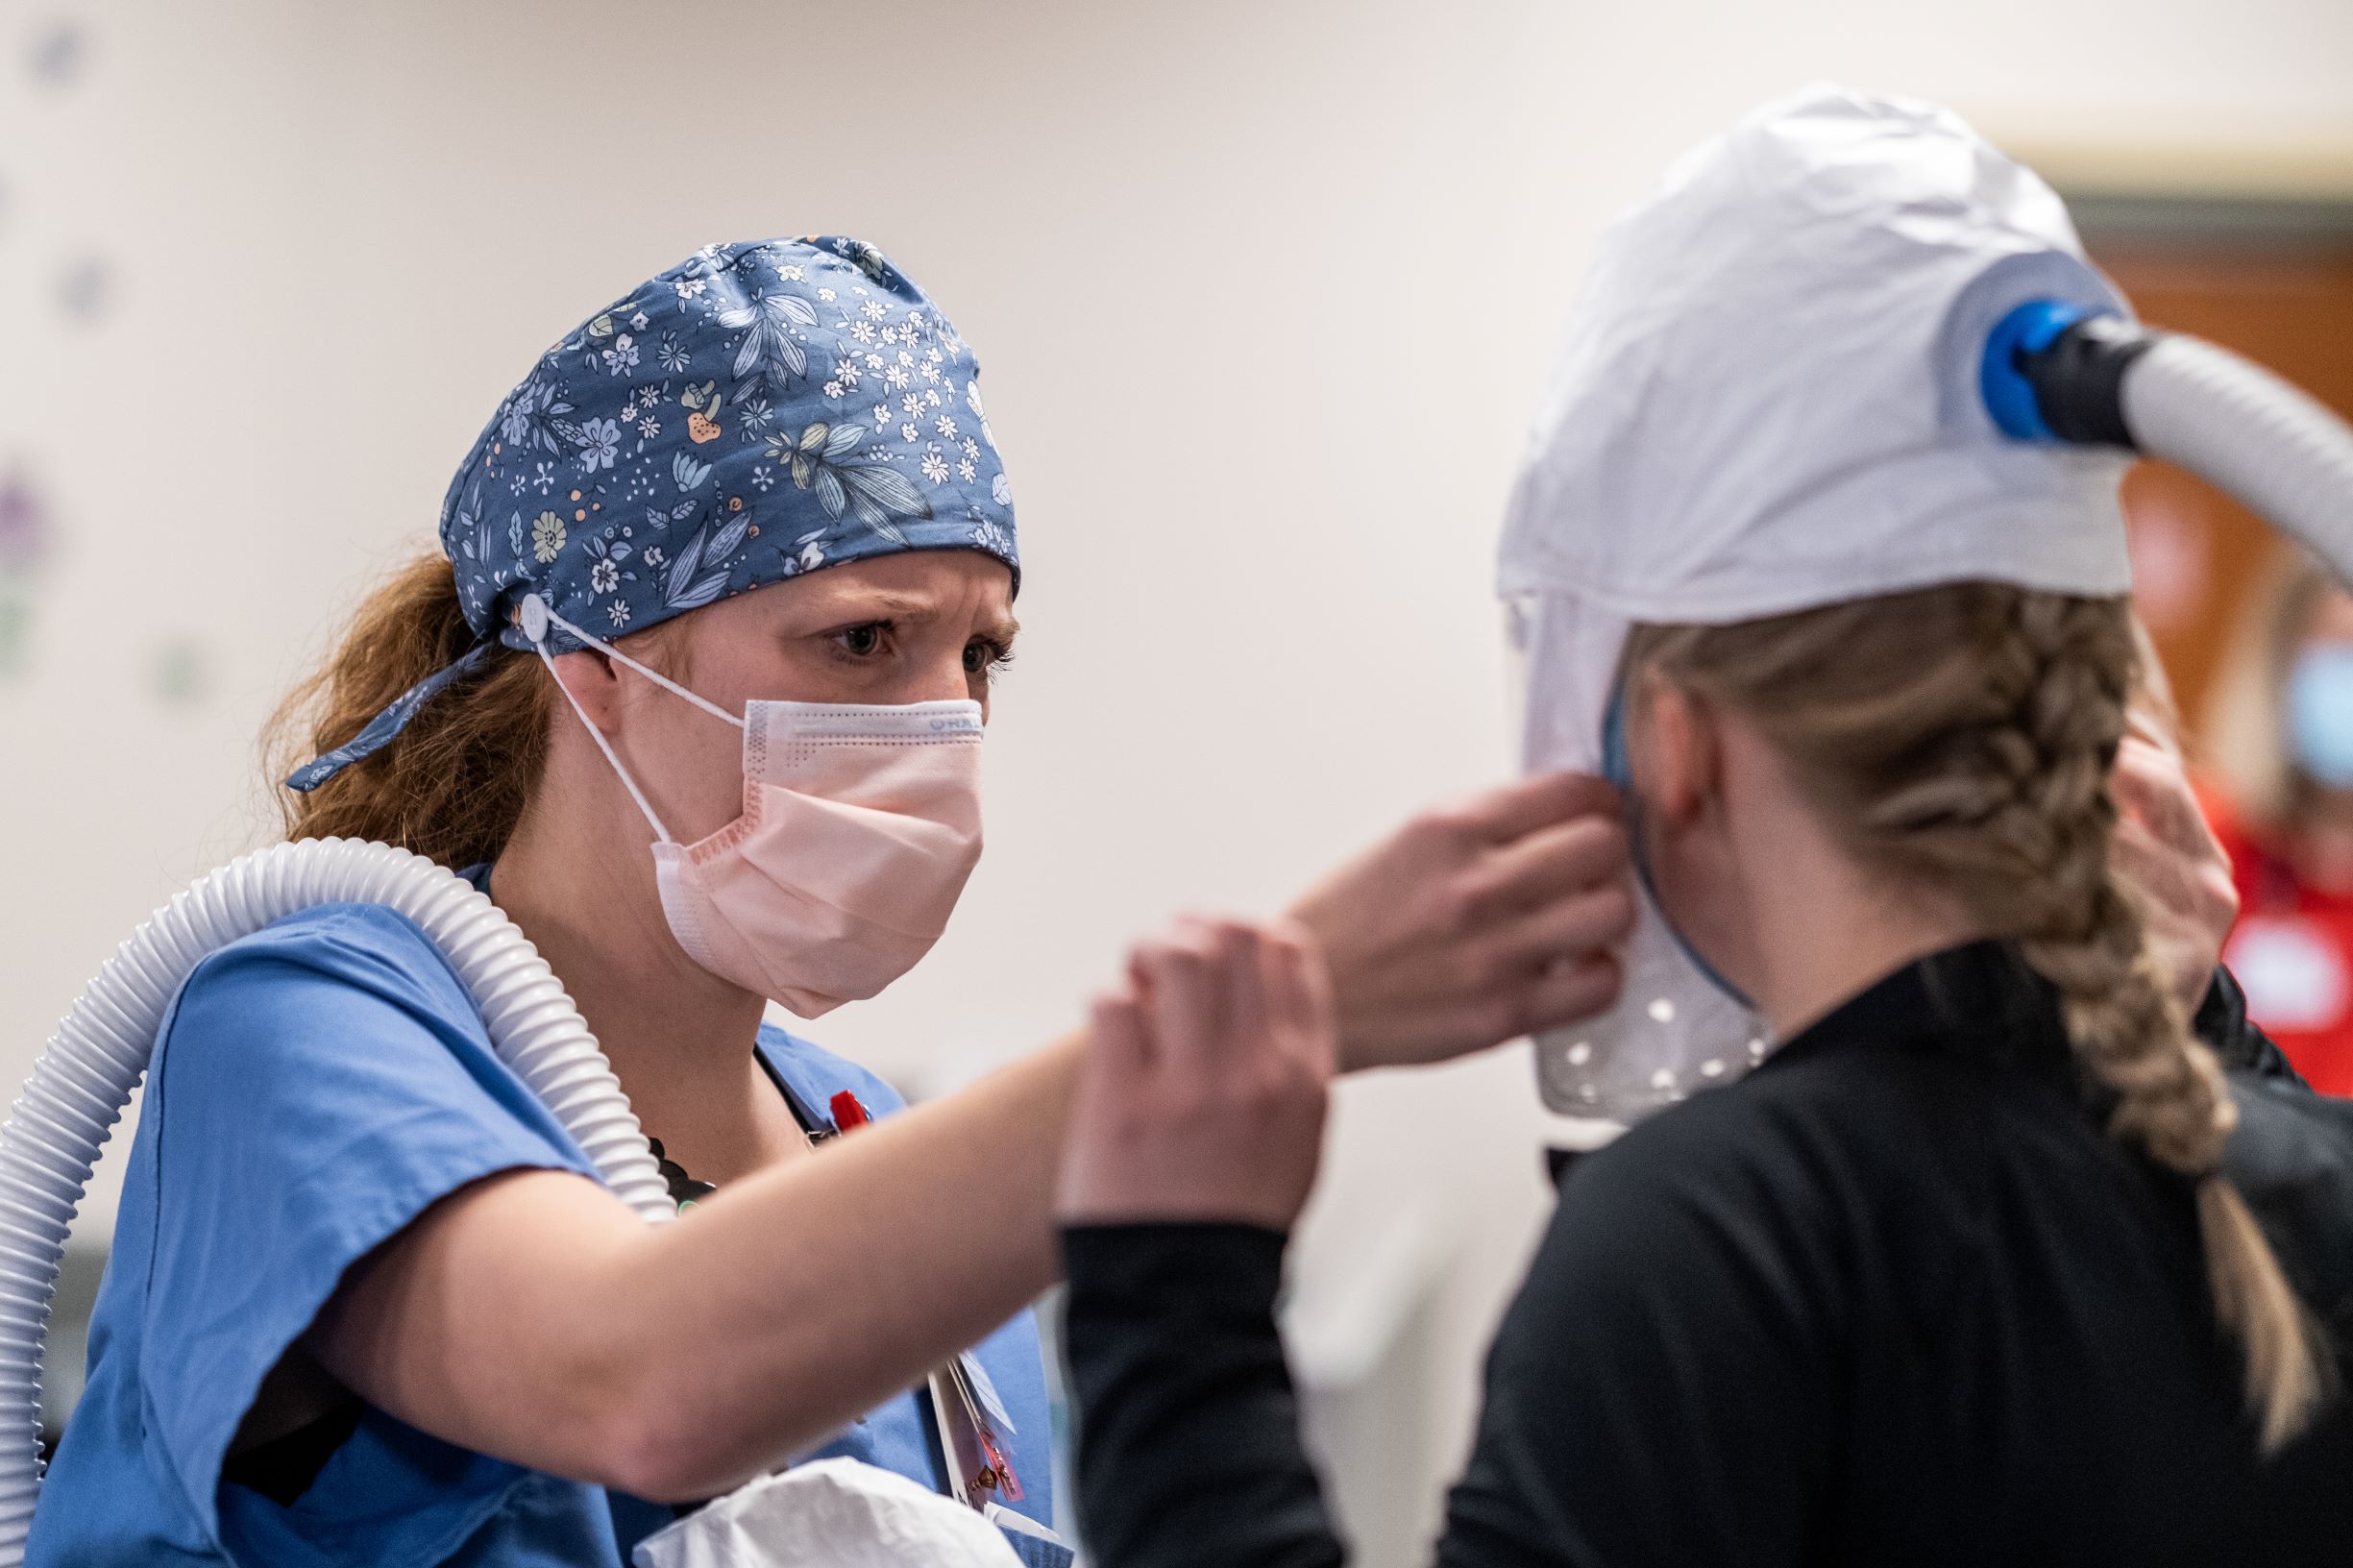 A healthcare worker helps a colleague adjust her personal protective equipment